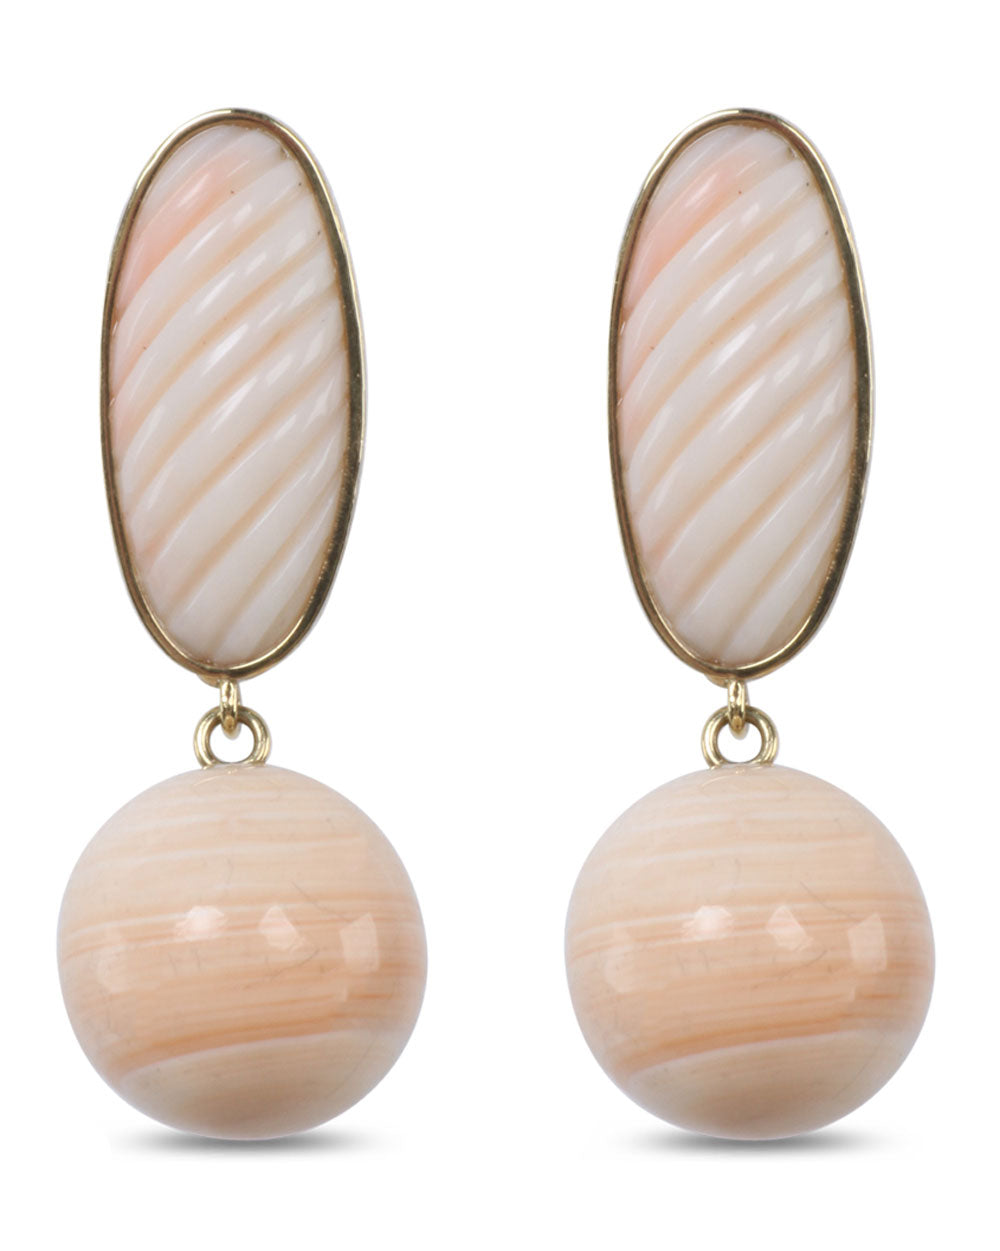 Carved Angelskin Coral and Cameo Earrings